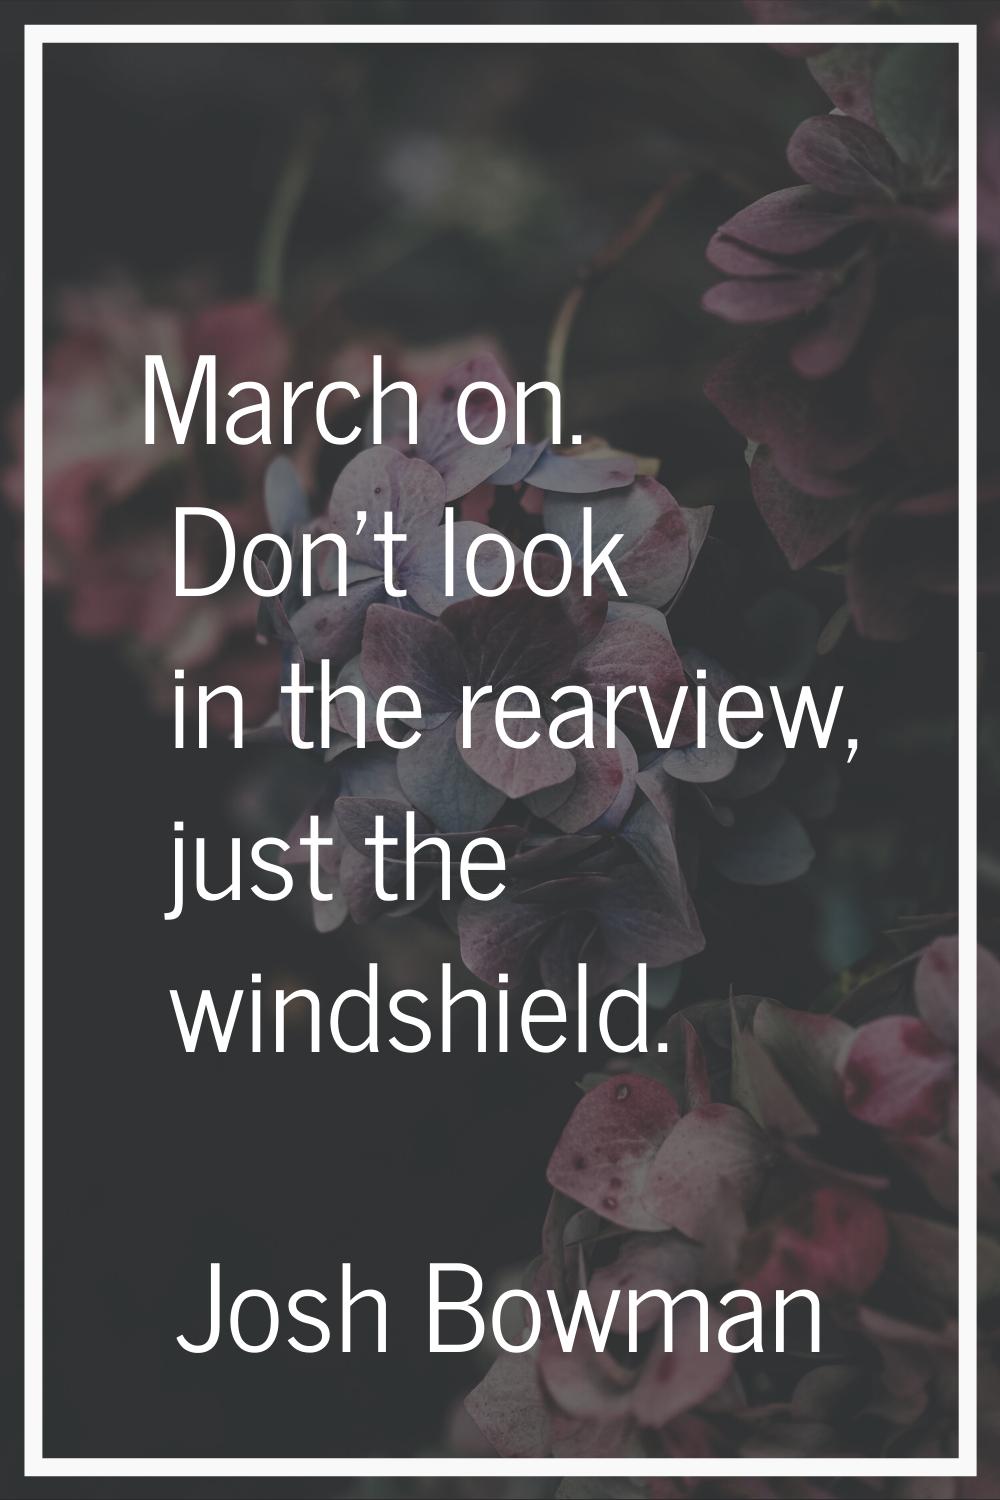 March on. Don't look in the rearview, just the windshield.